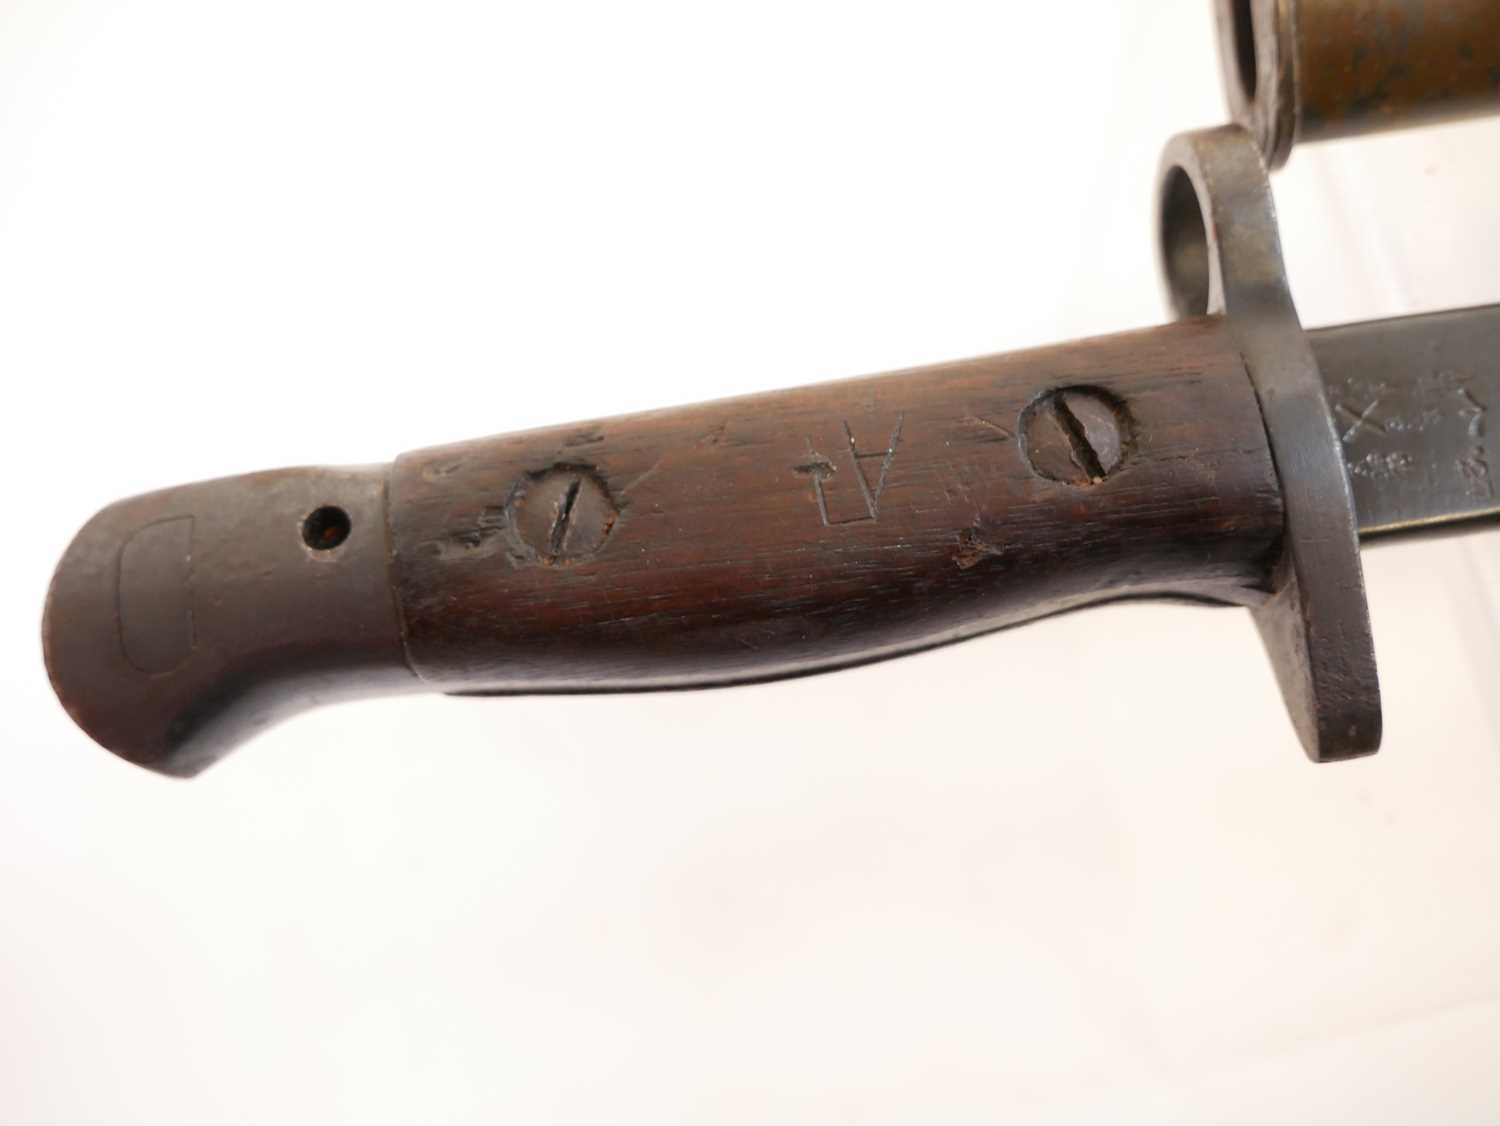 Lee Enfield SMLE 1907 pattern sword bayonet and scabbard, by Chapman, the ricasso stamped with 2' 17 - Image 3 of 9